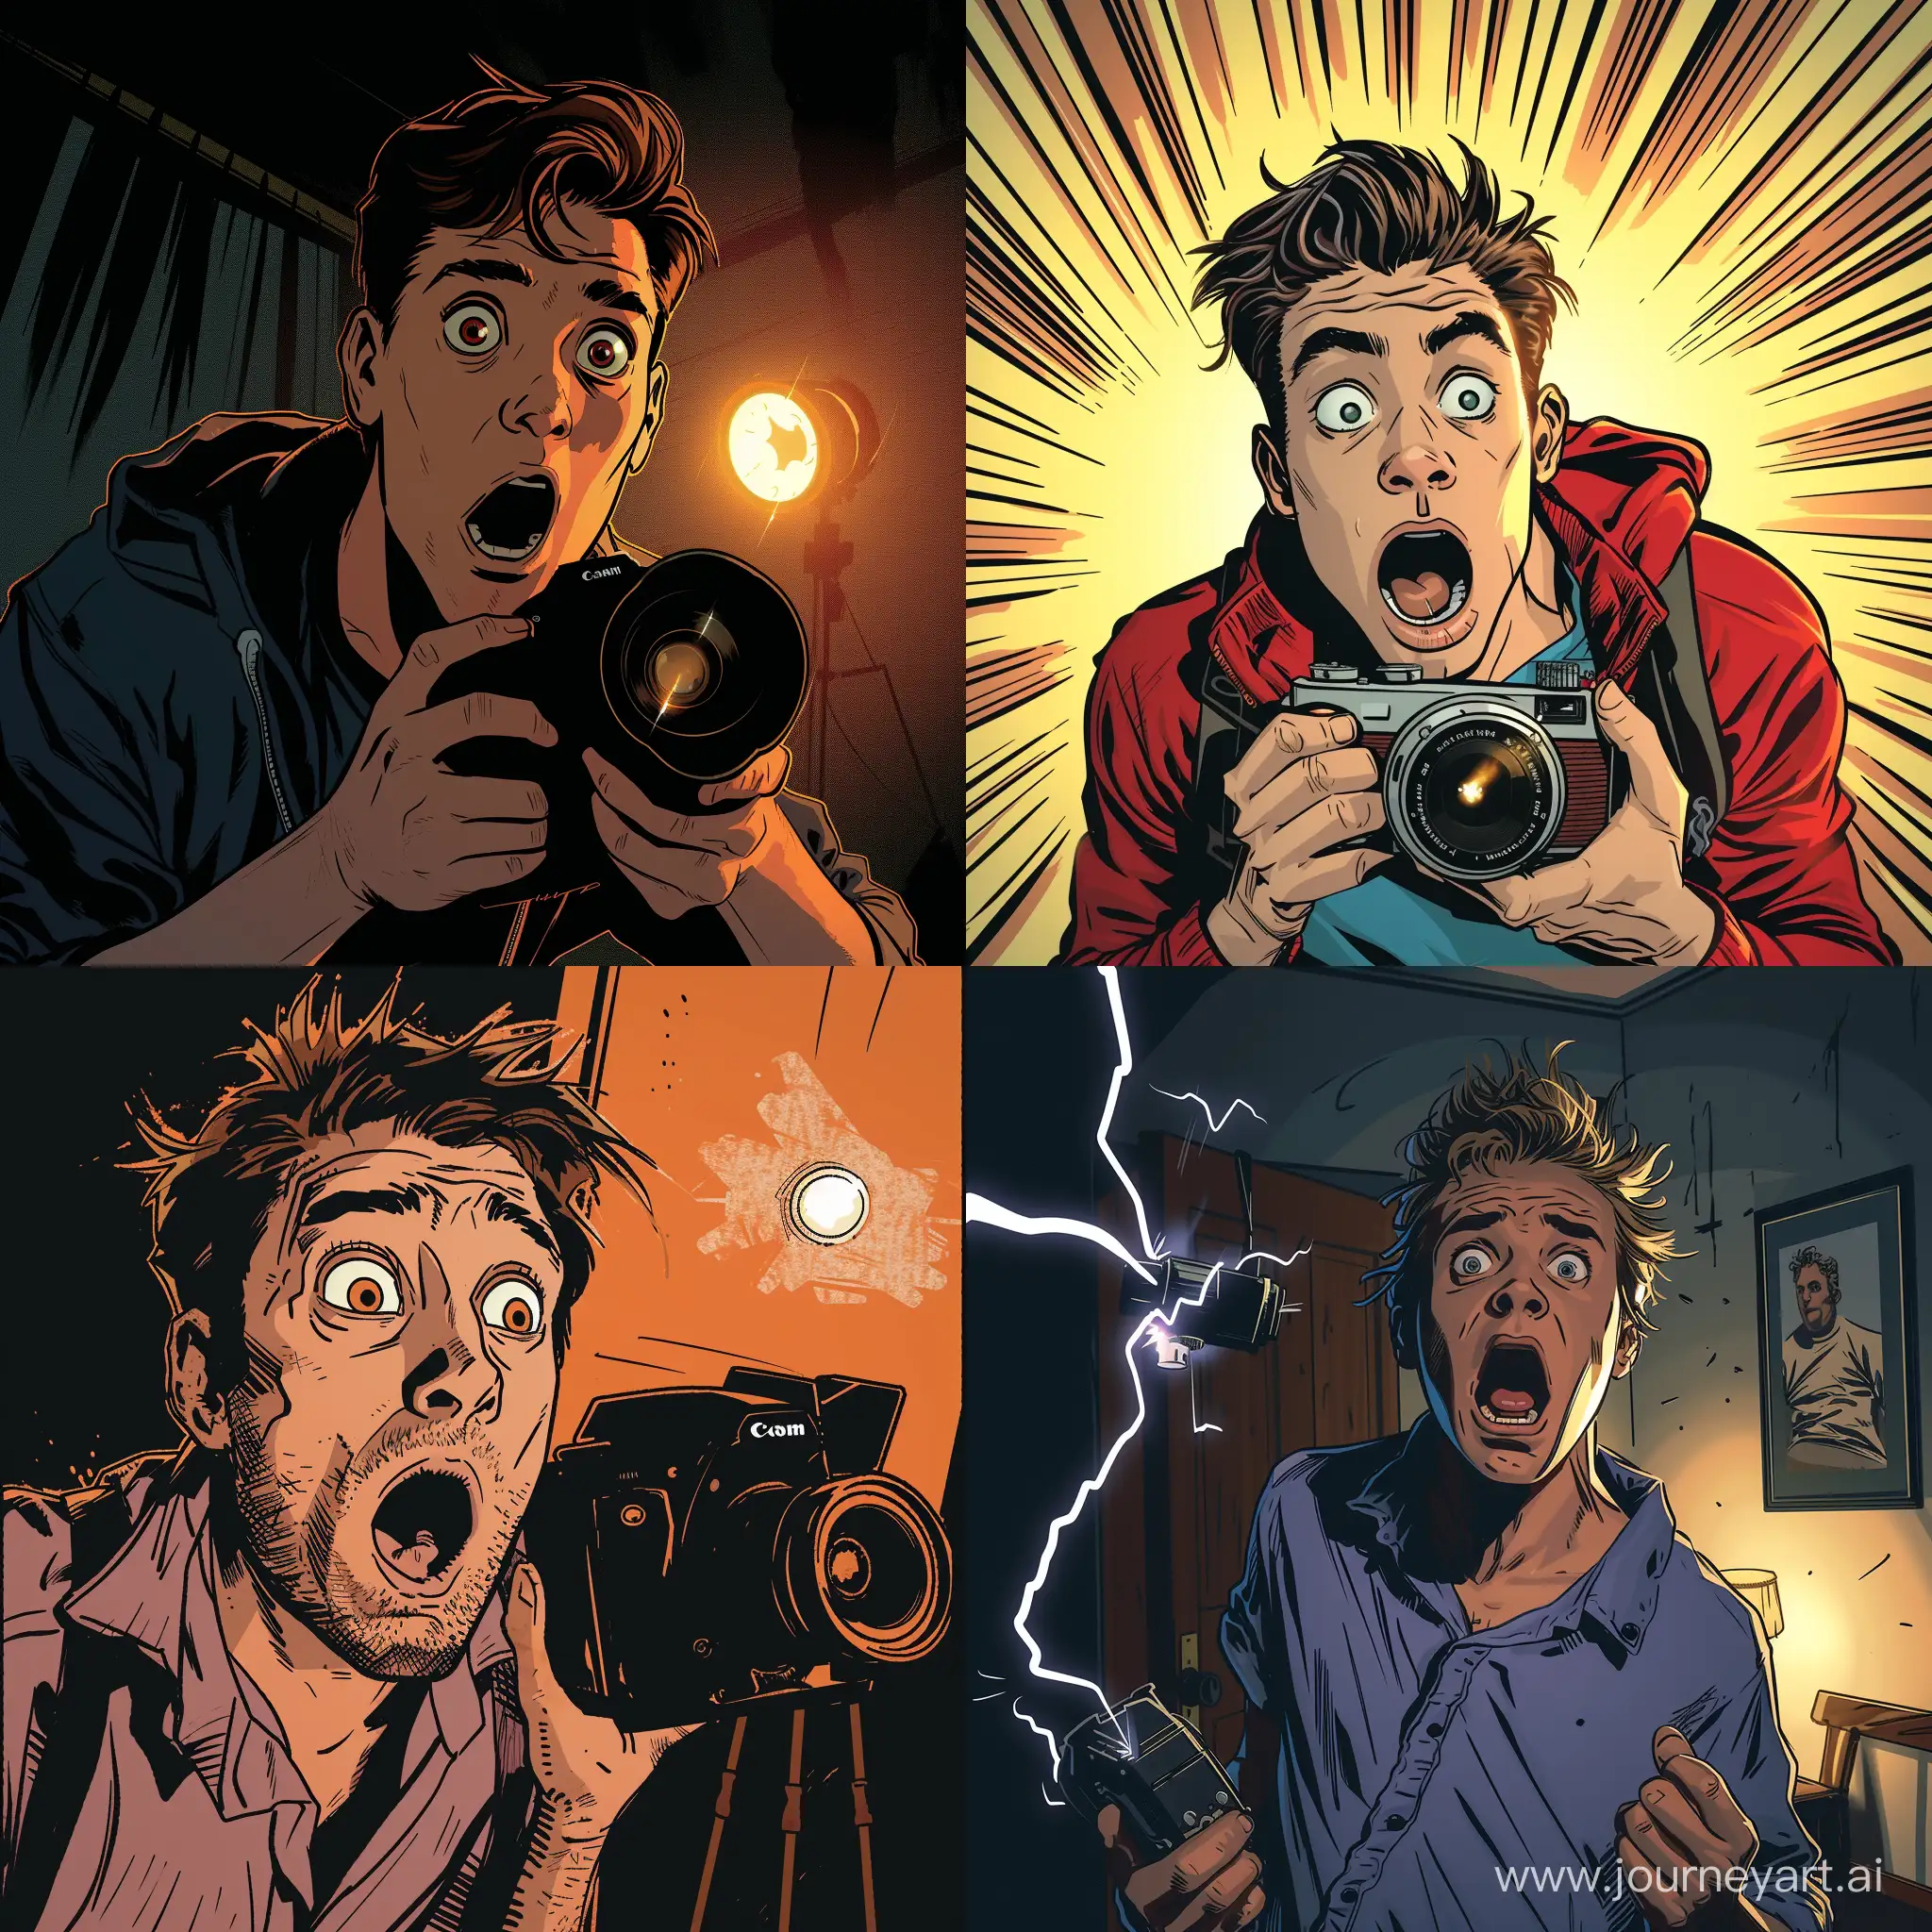 guy is in shock when he looks at camera recording, little lighting , modern american comic book style